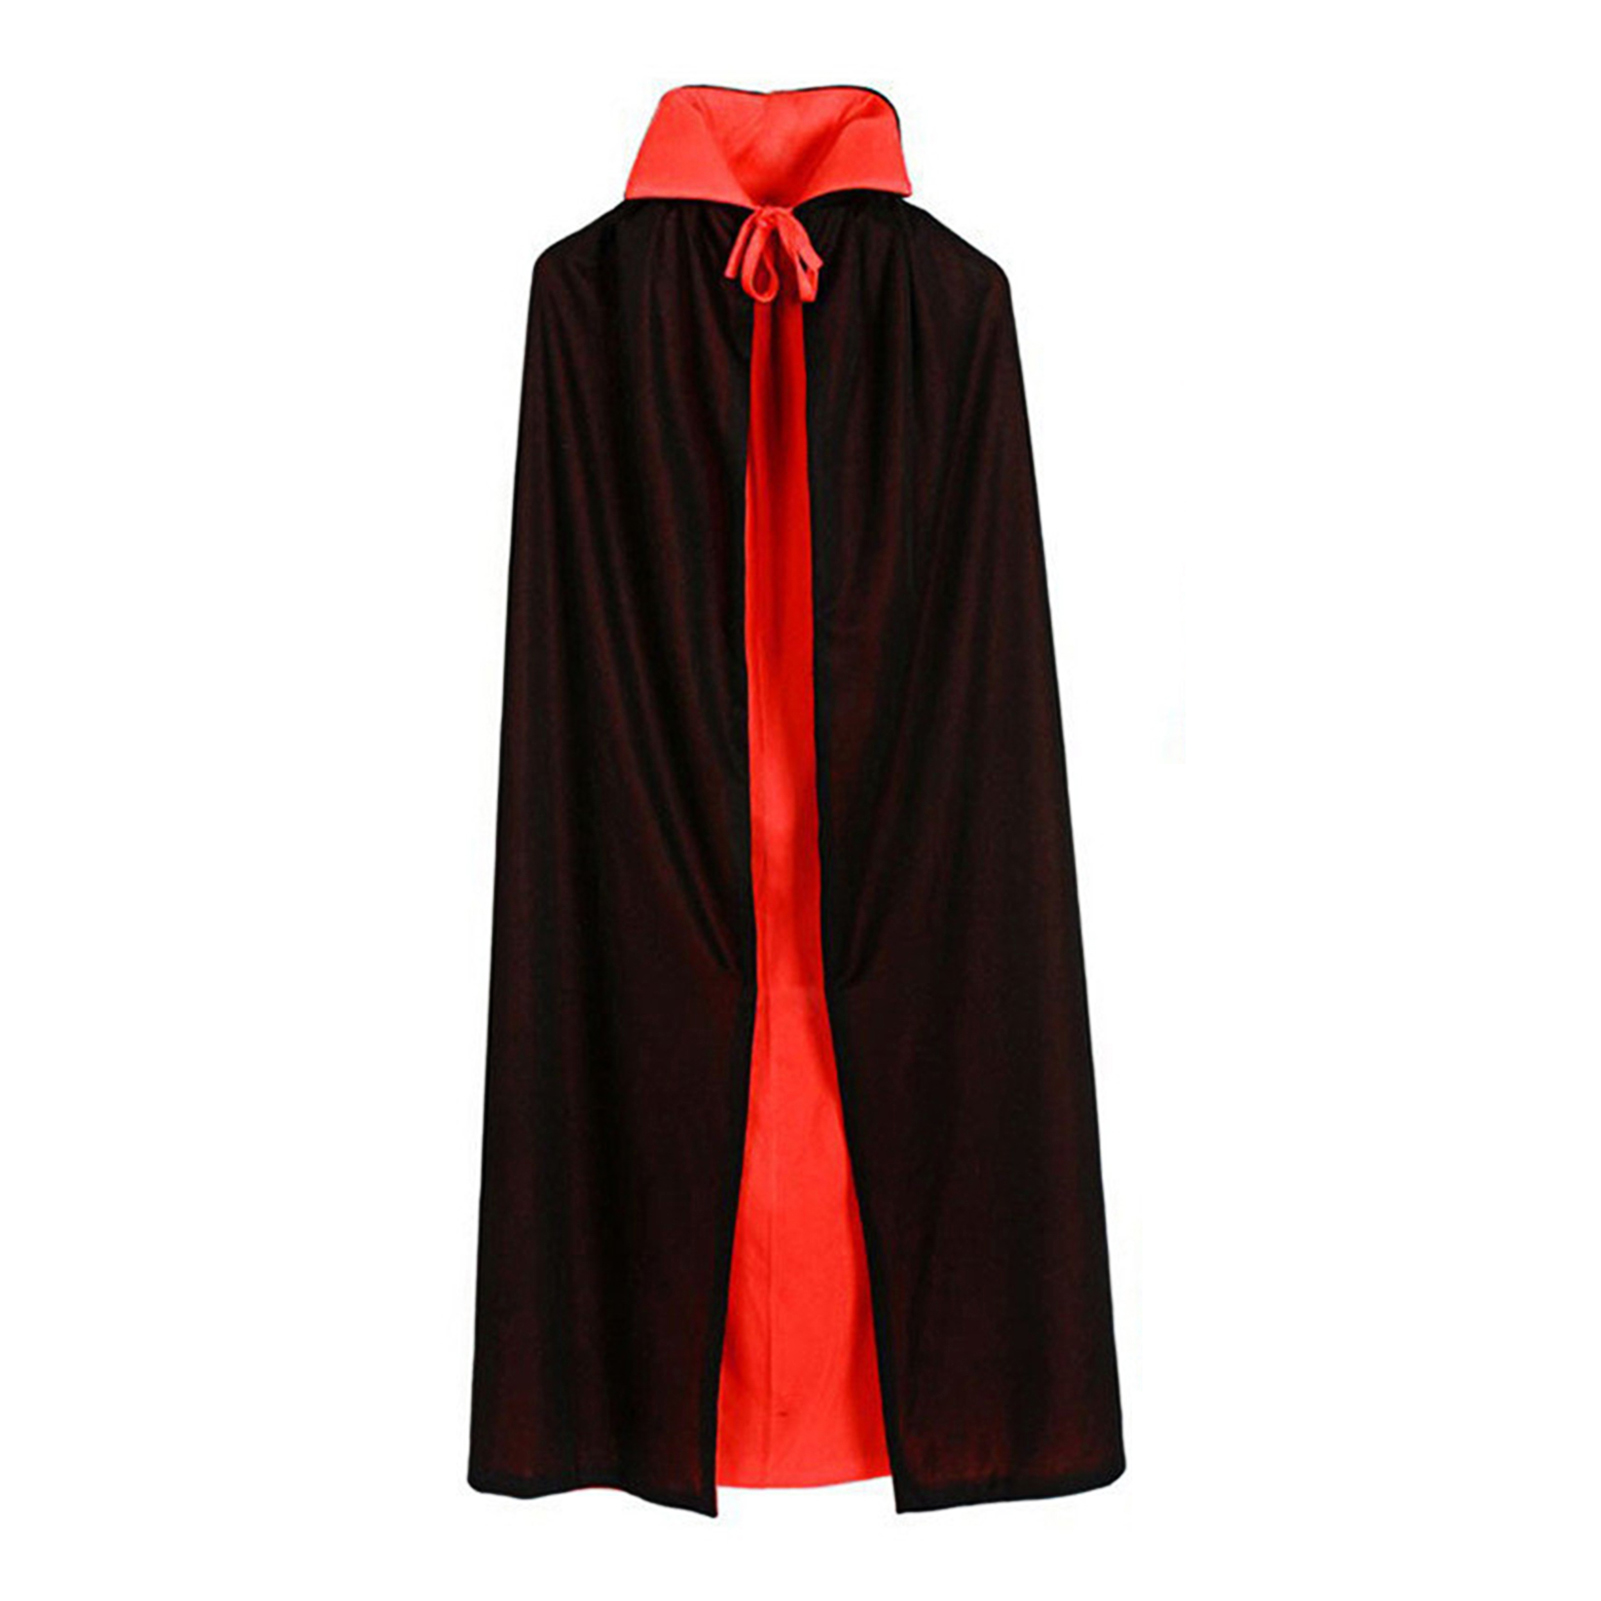 UHH Hooded Double Sides Kids Cloak Coat Stand Collar Lace Up Halloween